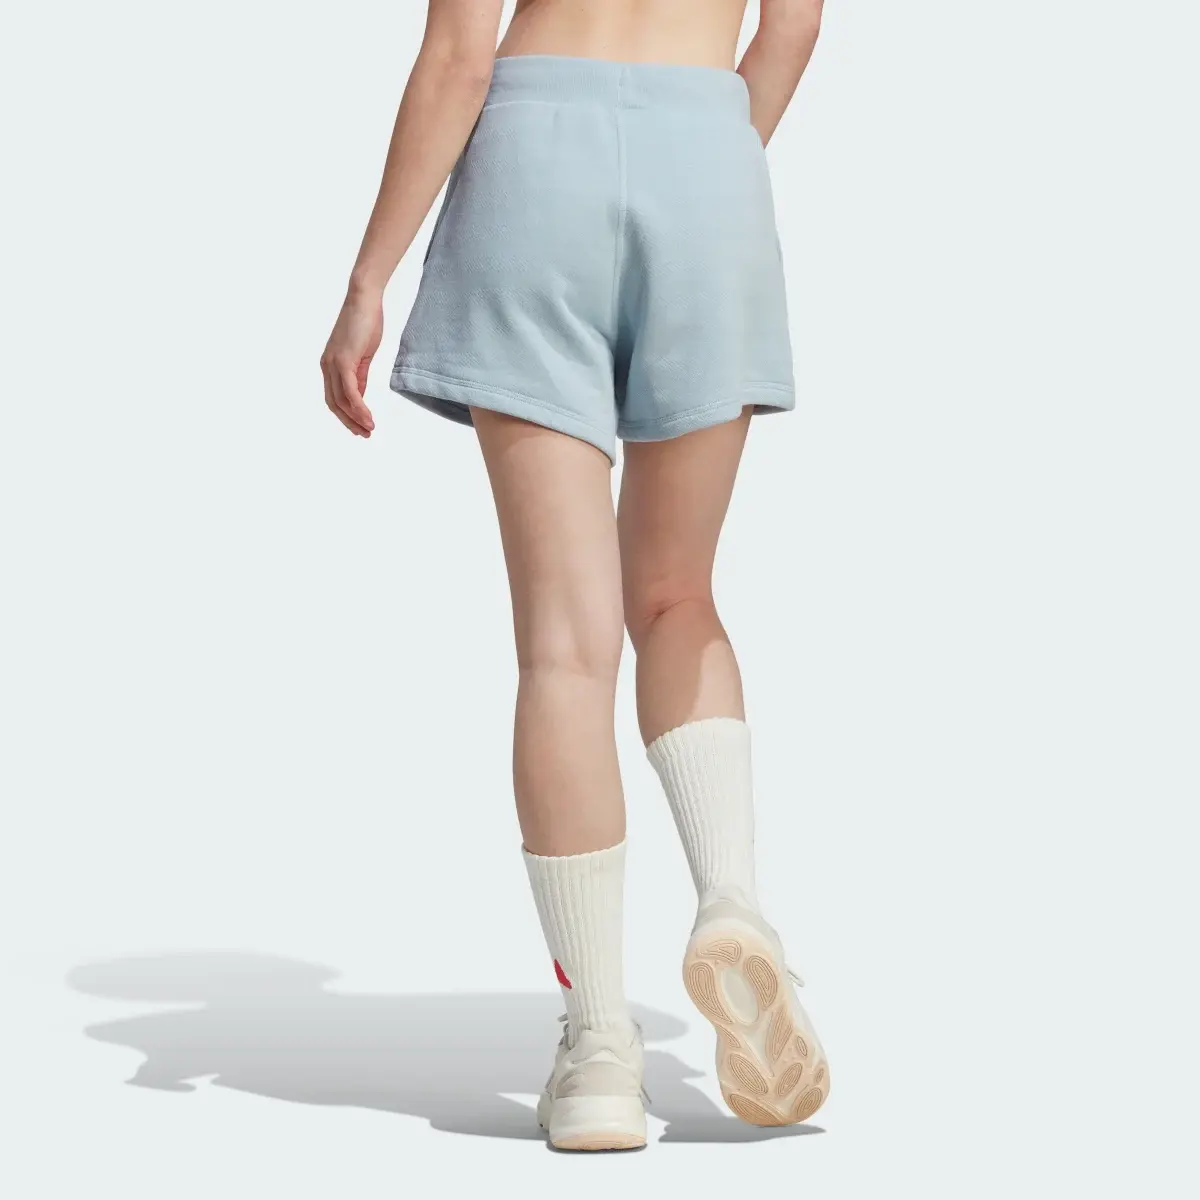 Adidas Shorts Lounge French Terry. 2